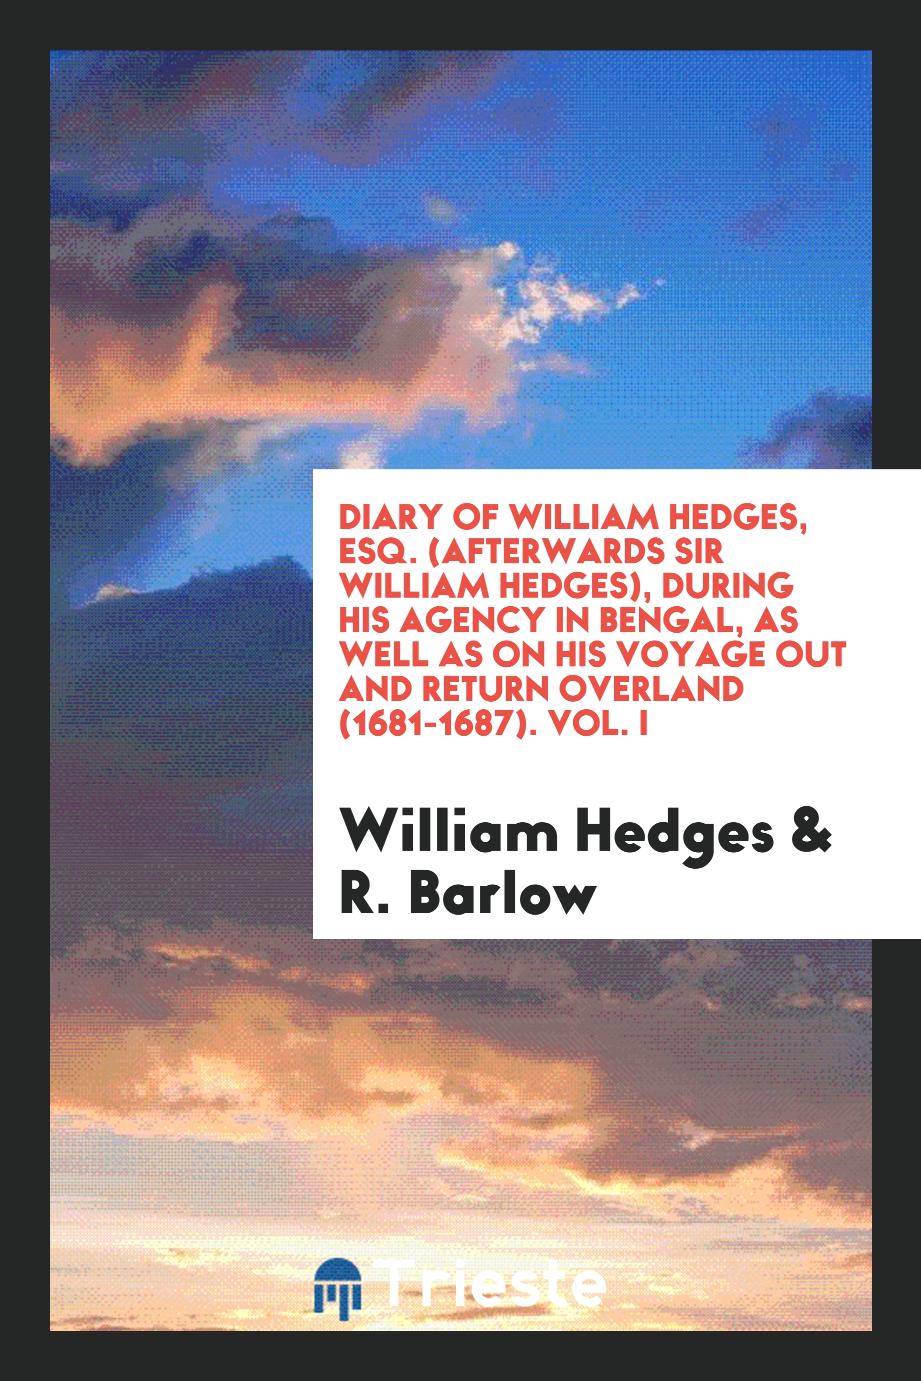 William Hedges, R. Barlow - Diary of William Hedges, Esq. (Afterwards Sir William Hedges), During His Agency in Bengal, as Well as on His Voyage Out and Return Overland (1681-1687). Vol. I